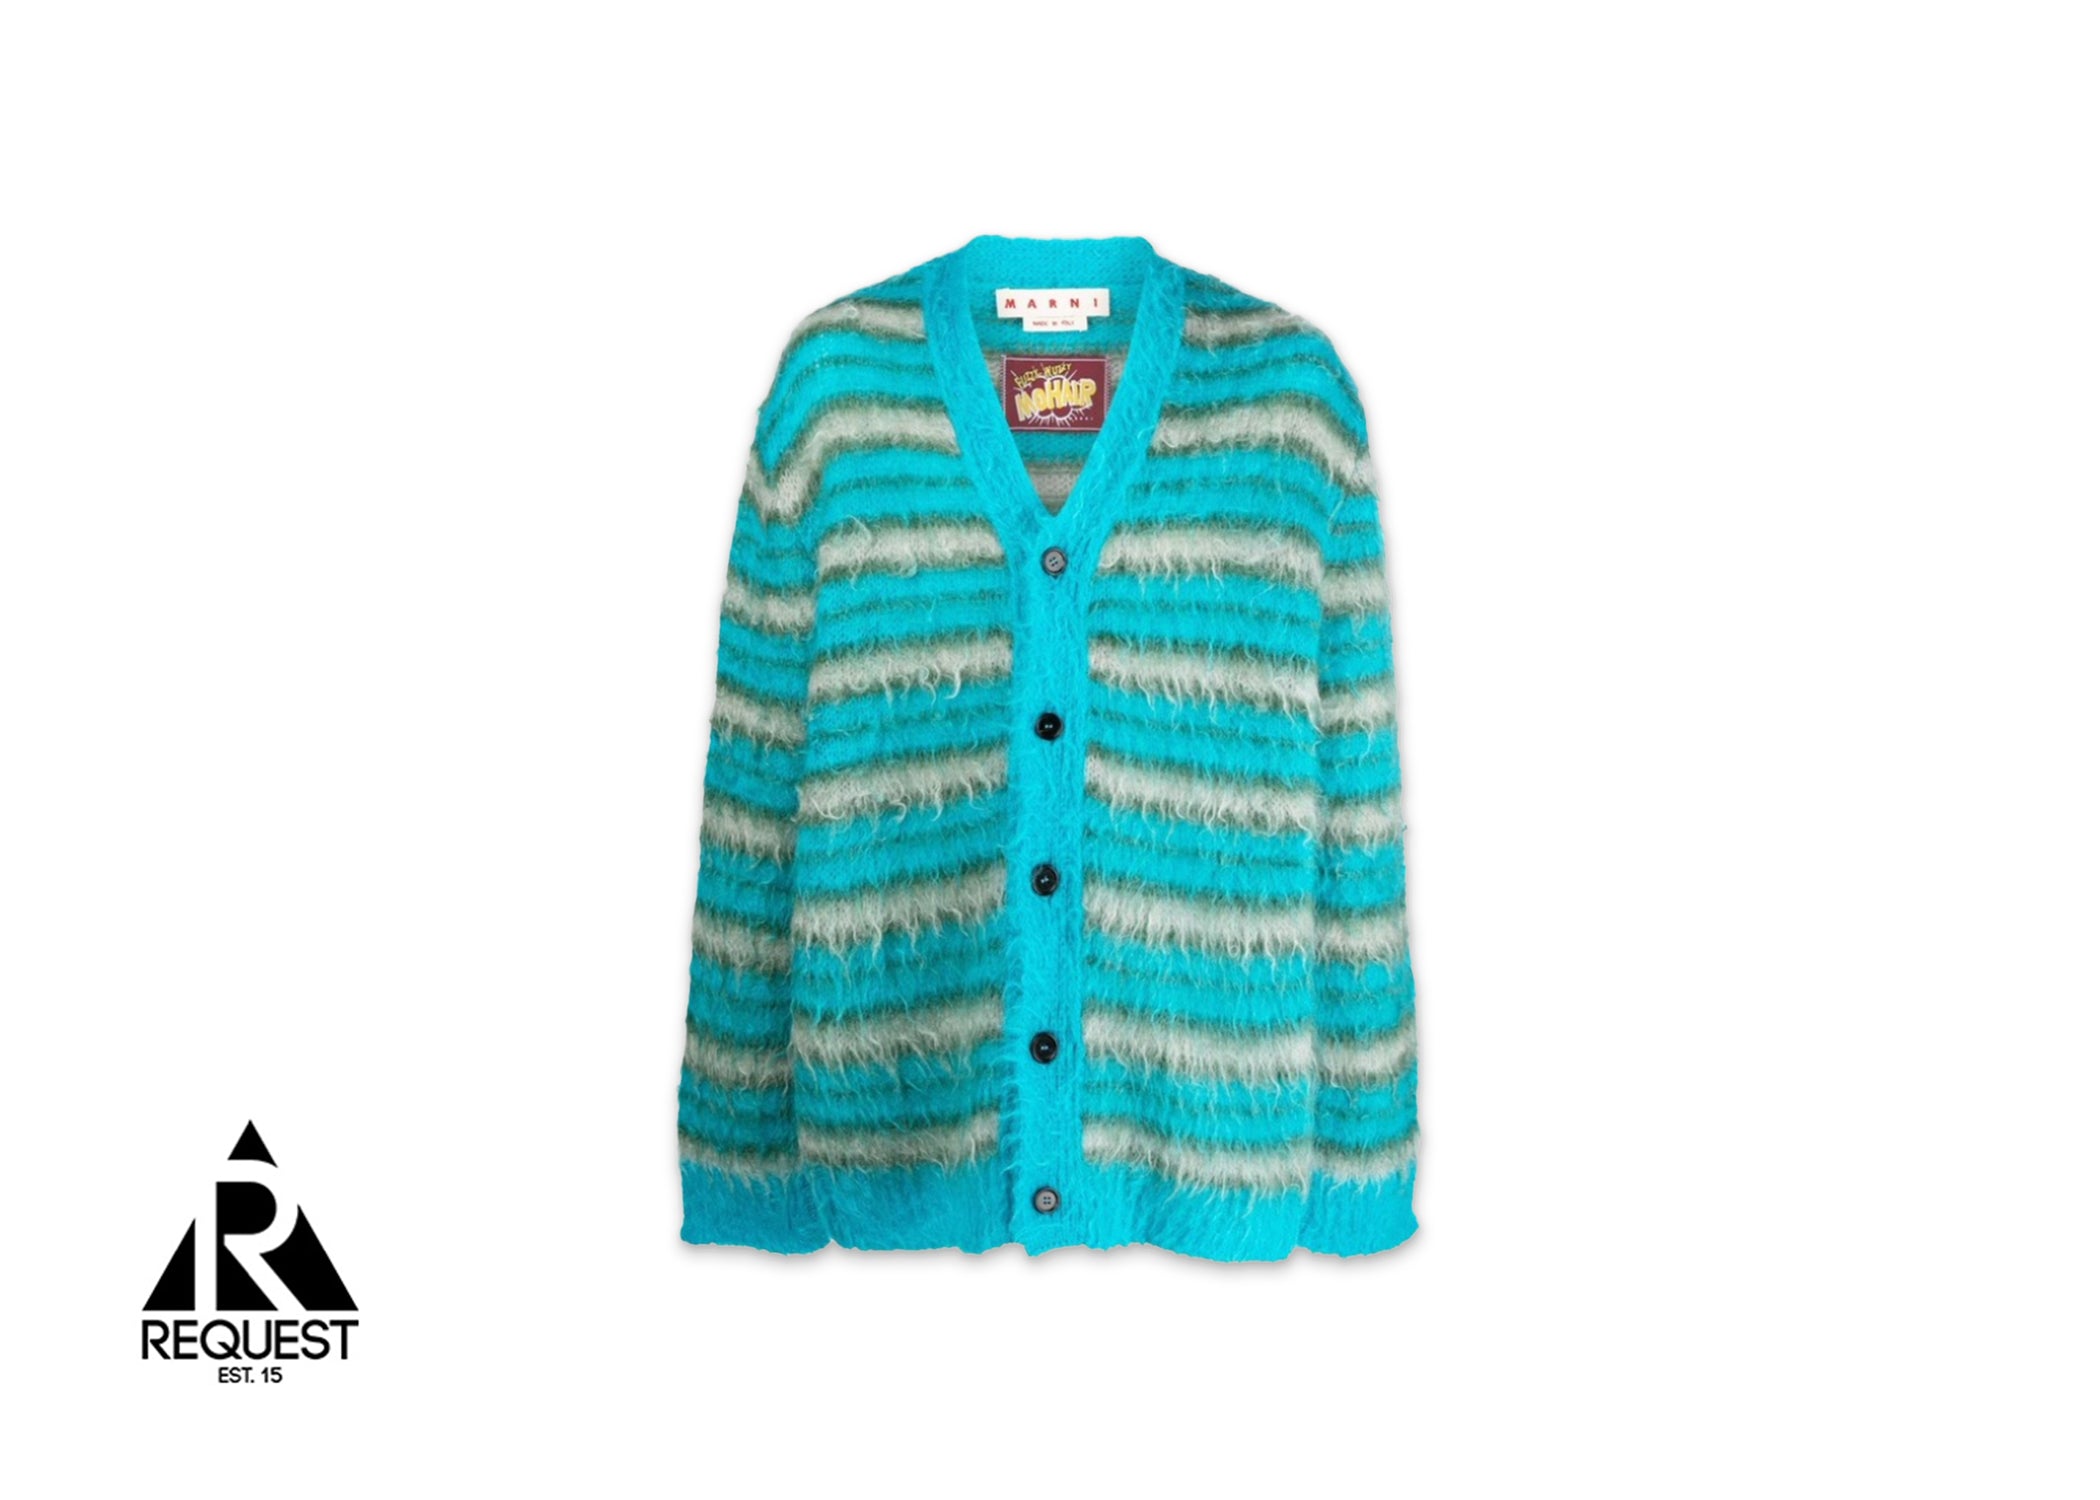 Marni Iconic Groovy Striped Mohair Cardigan "Turquoise"